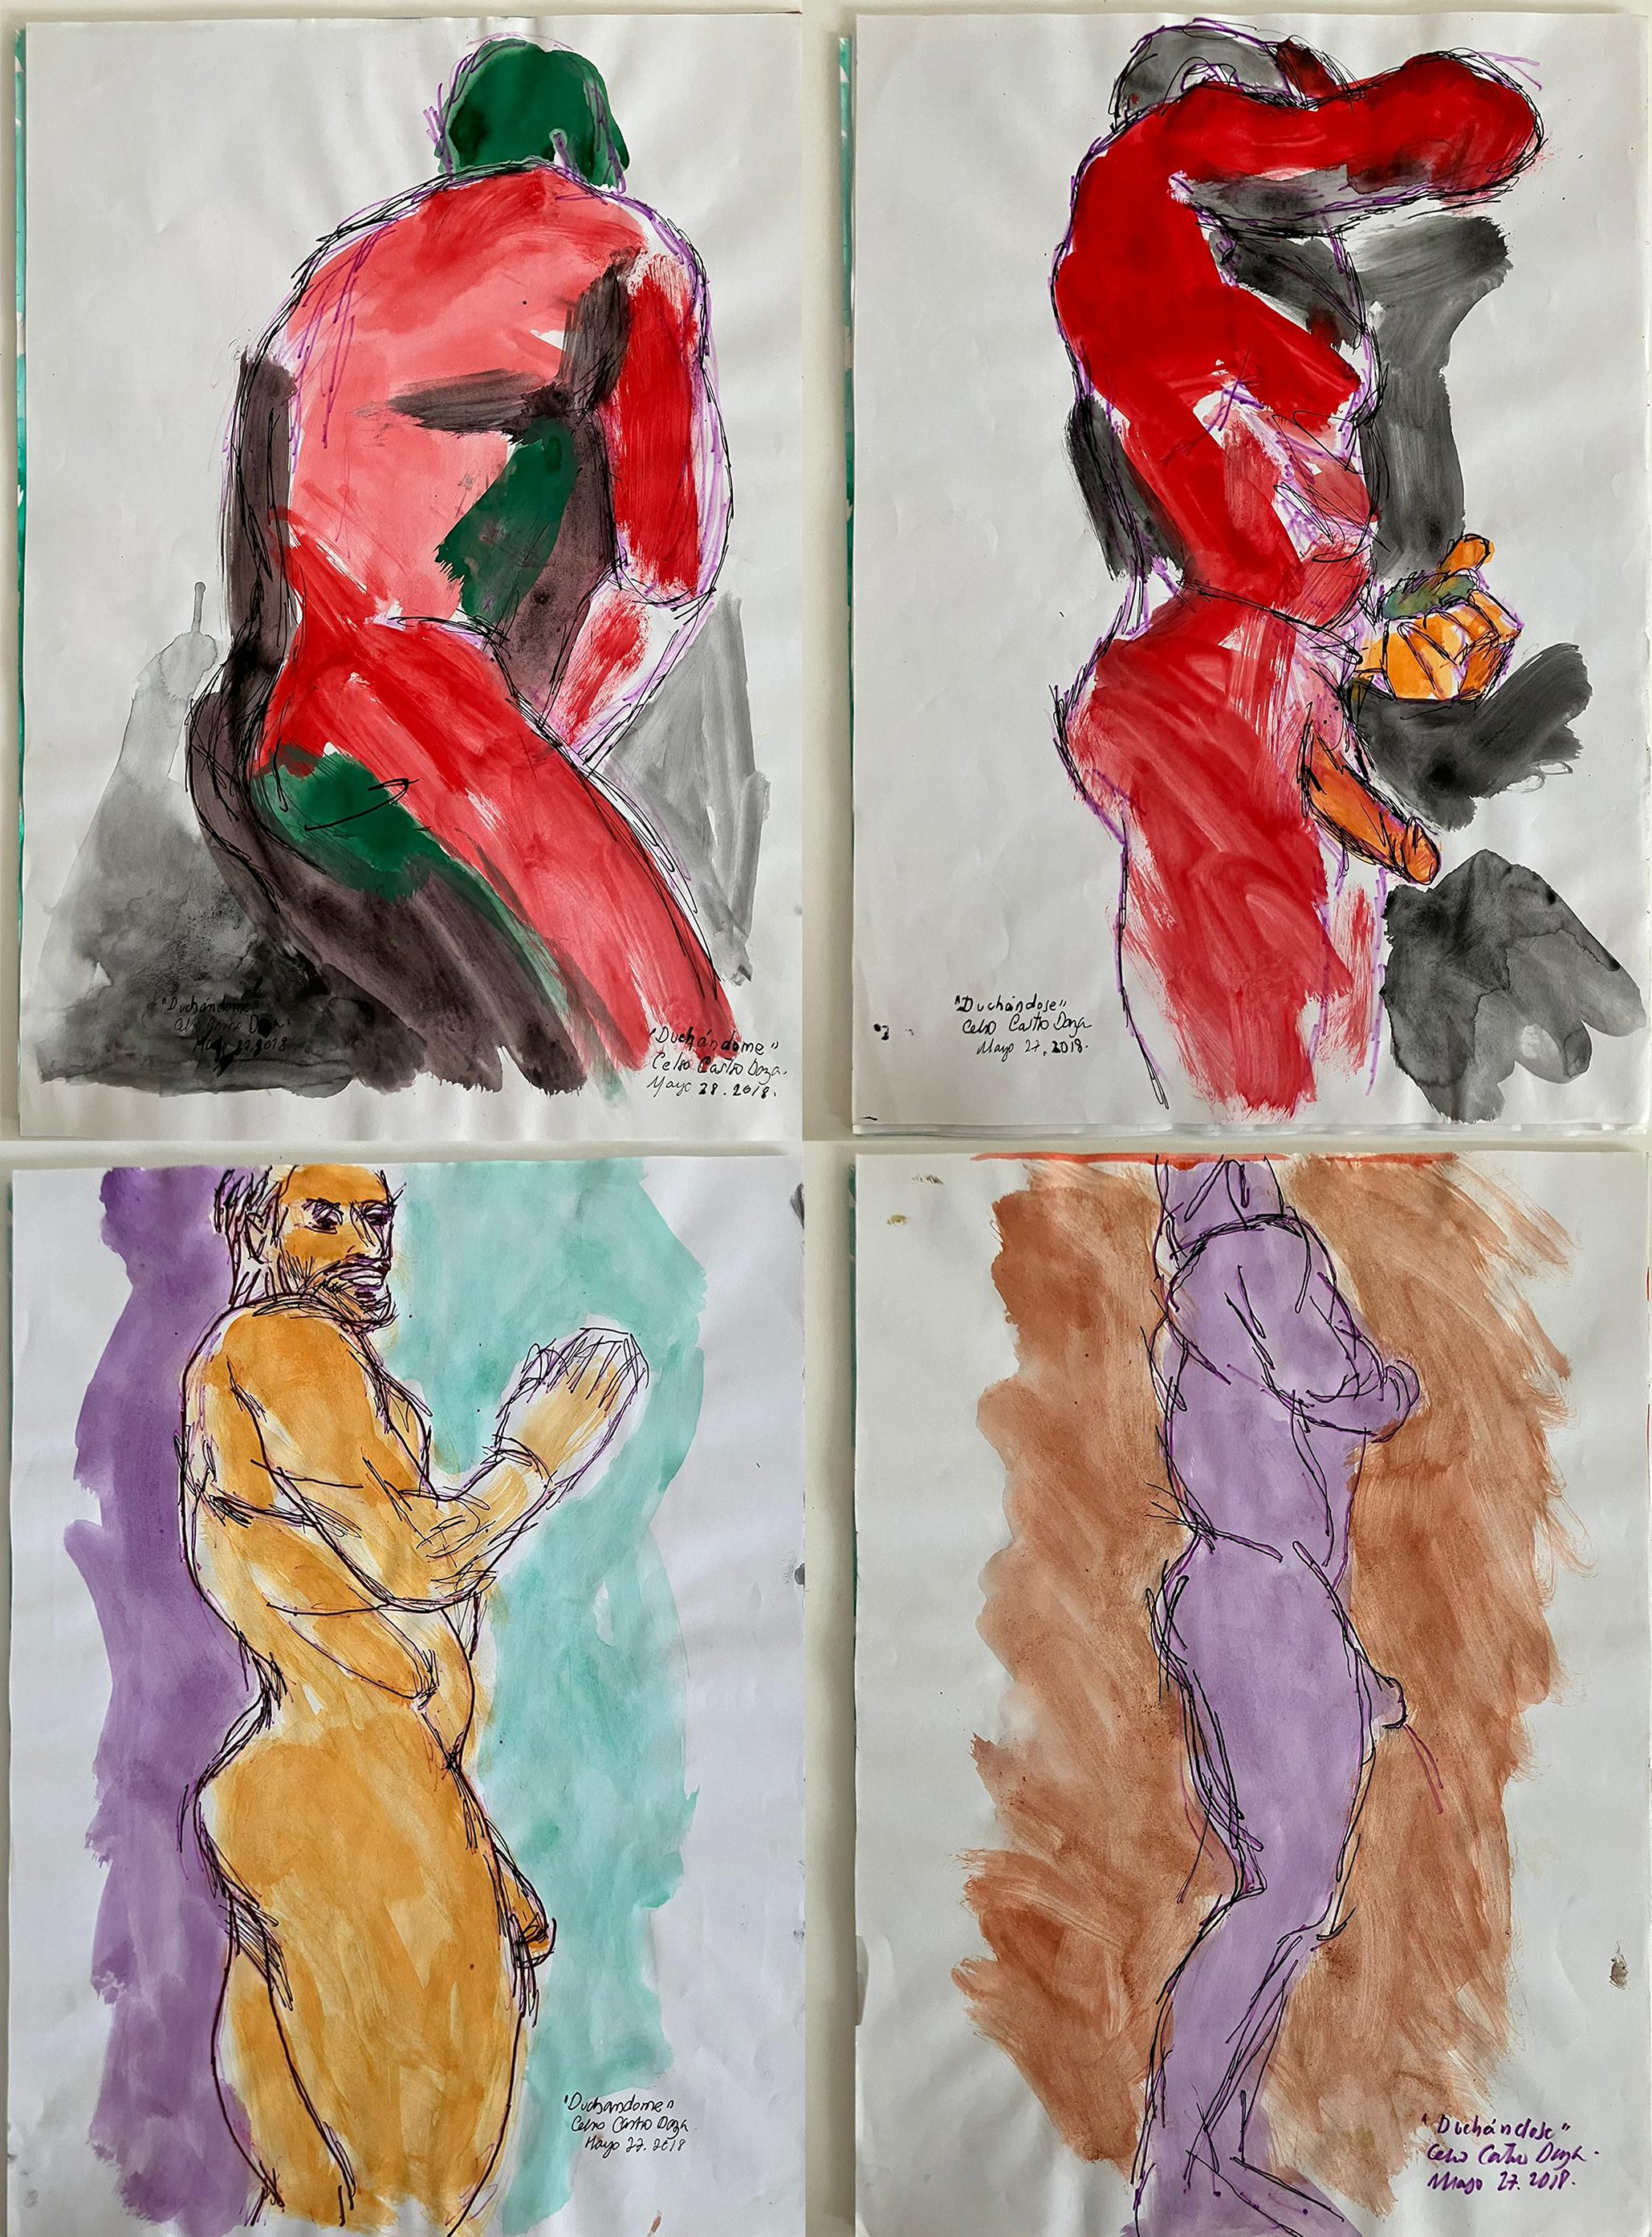  Duchándome Nude,  Series. Set of 4 Watercolors on archival paper.